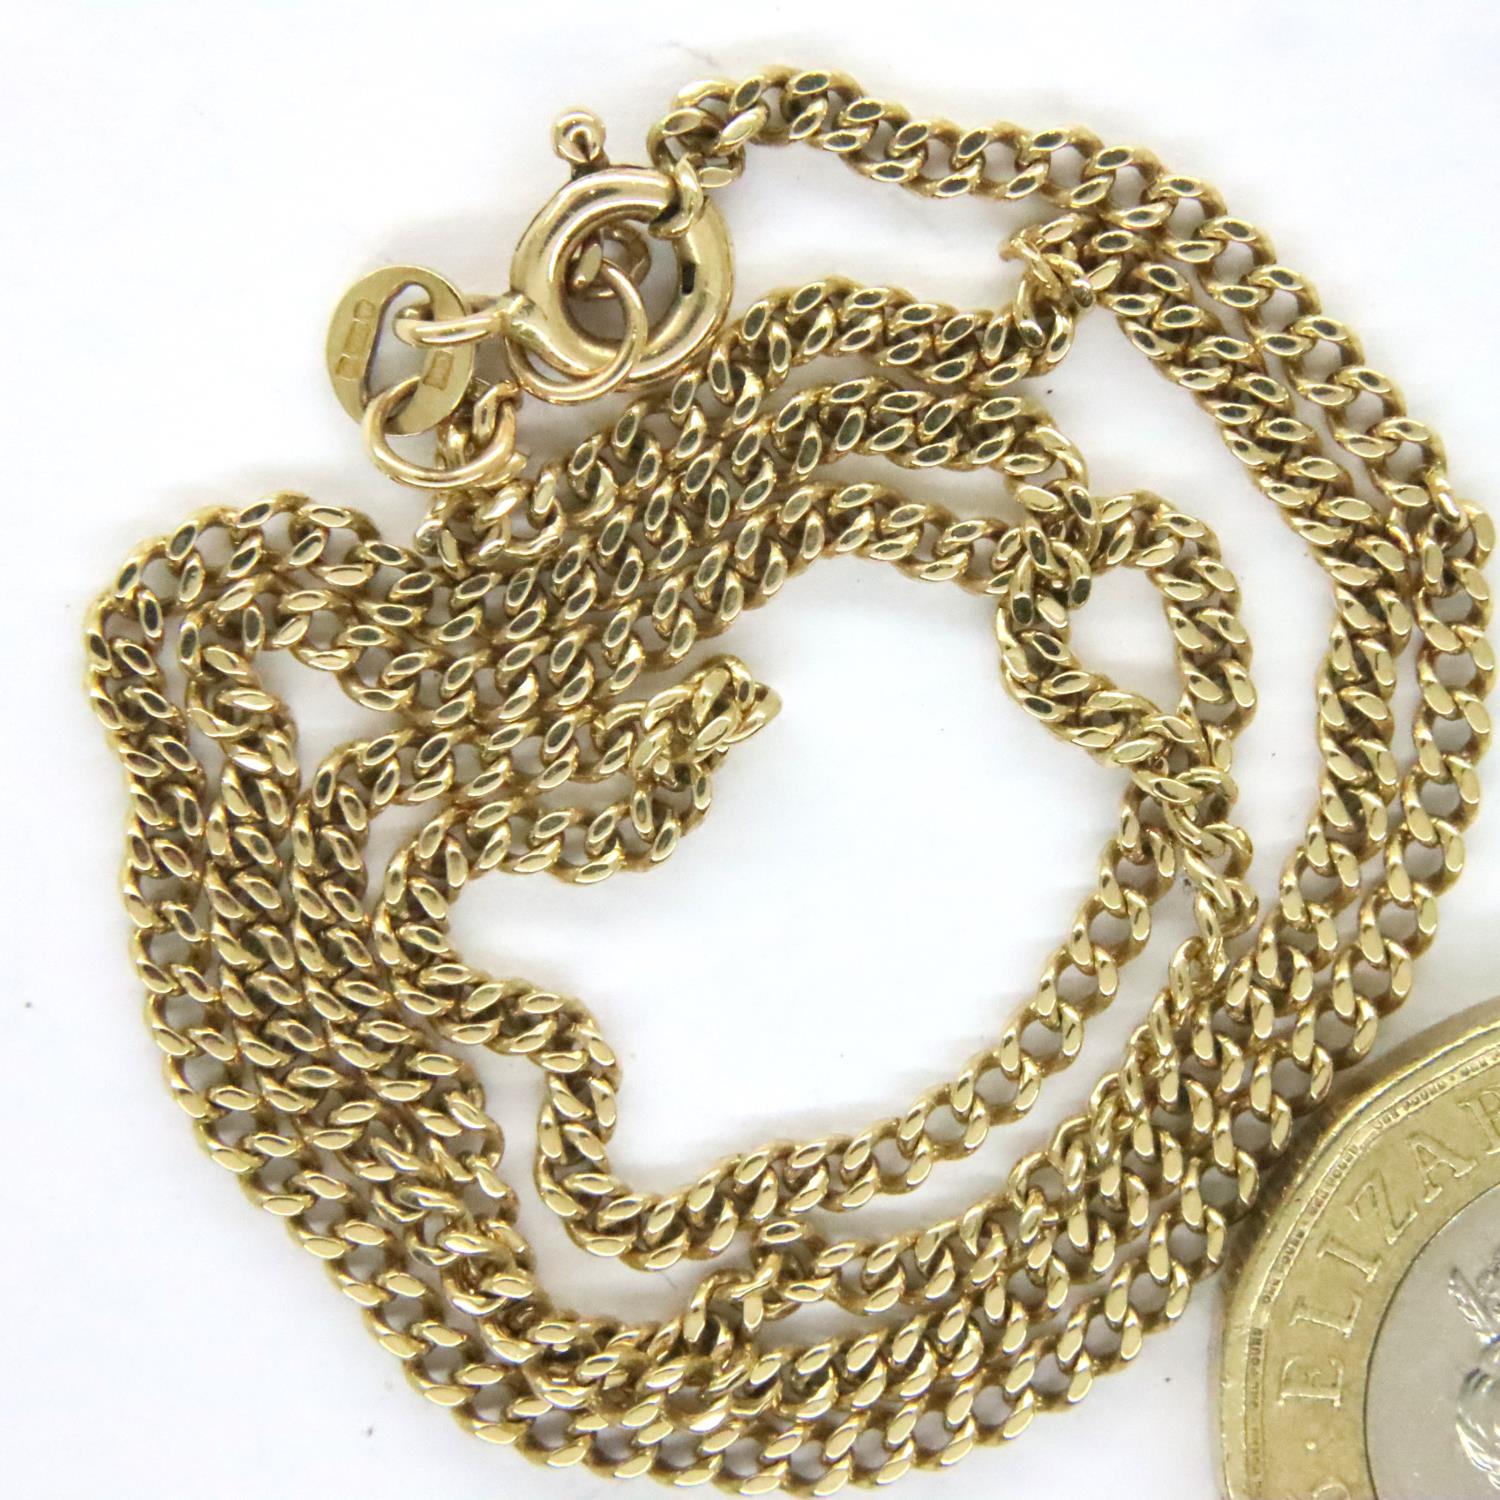 9ct gold neck chain, L: 45 cm, 4.8g. P&P Group 1 (£14+VAT for the first lot and £1+VAT for